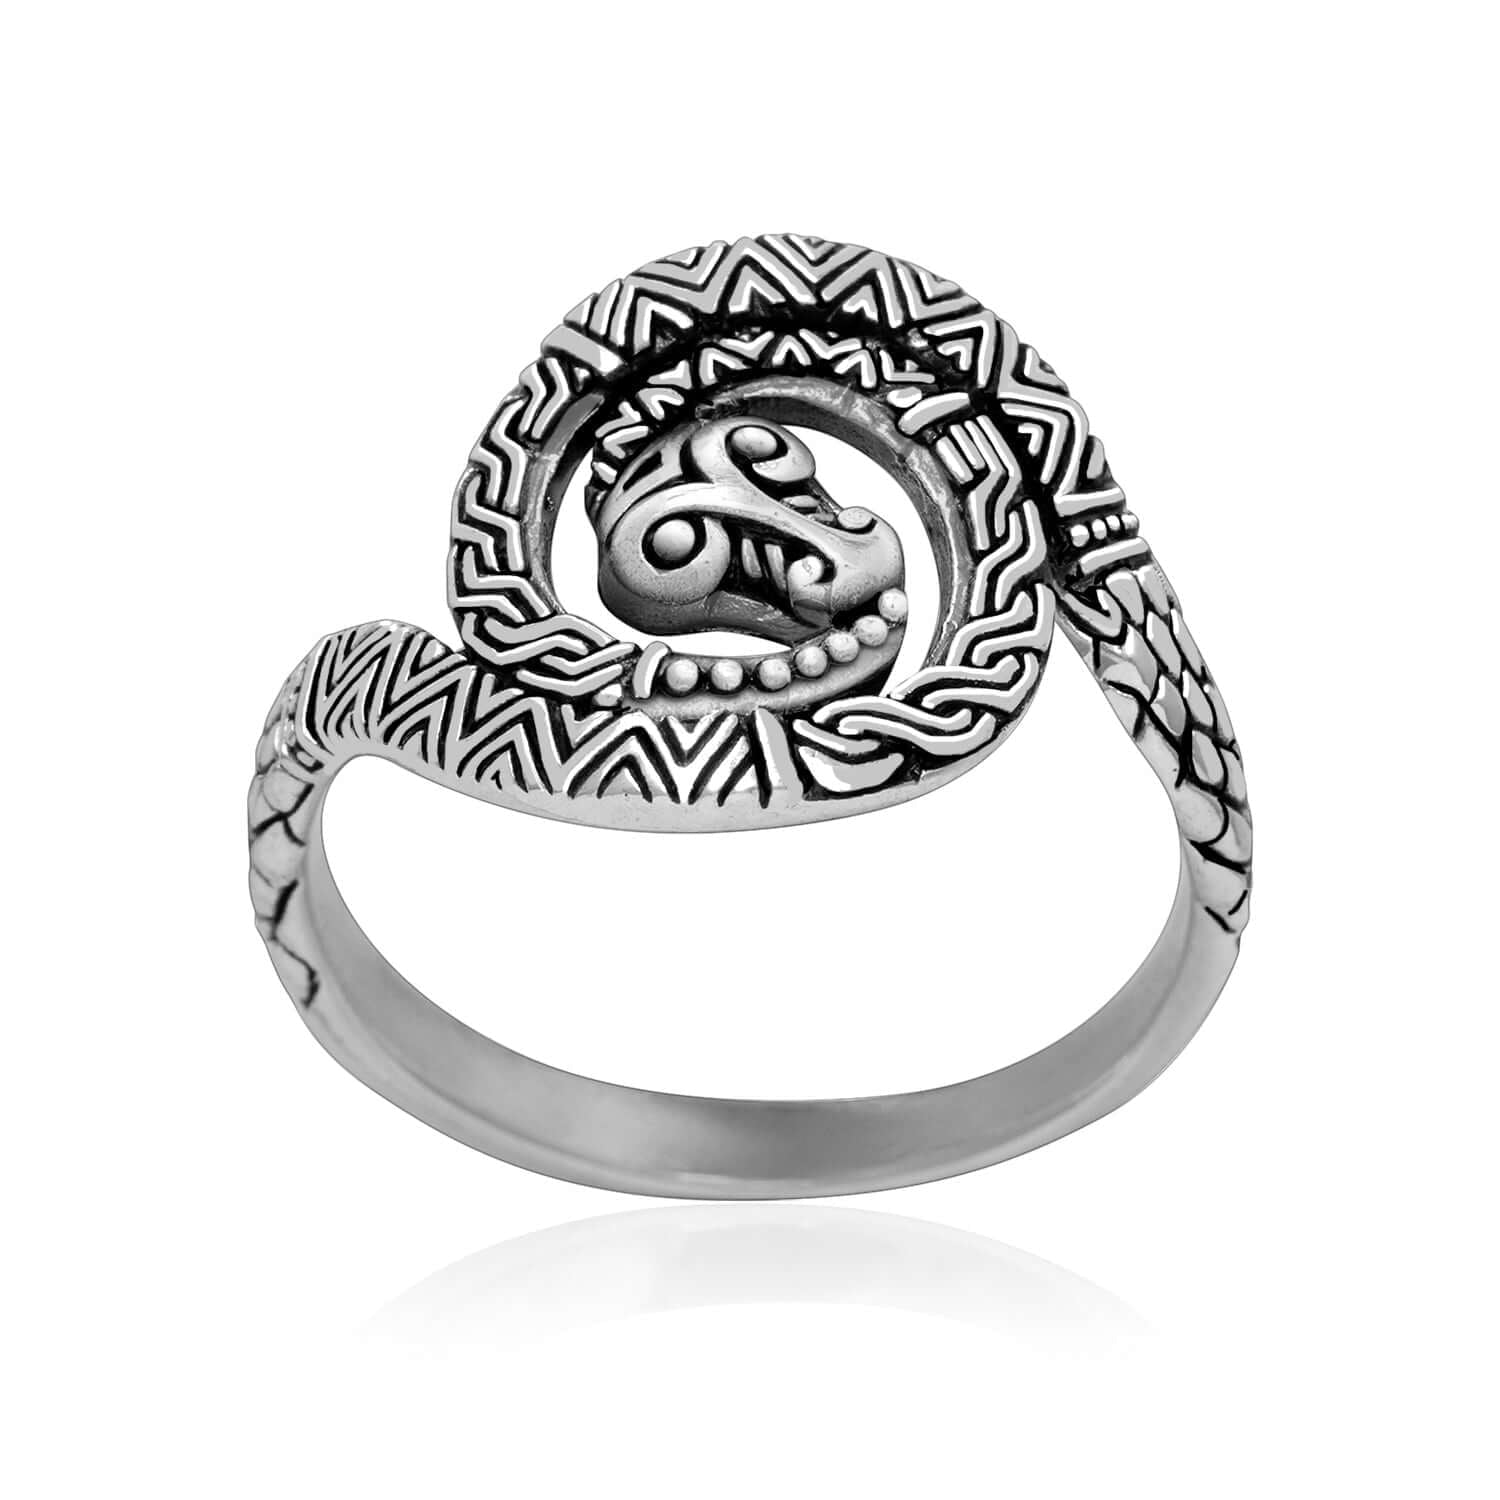 925 Sterling Silver Greek Ouroboros Snake Ring - SilverMania925